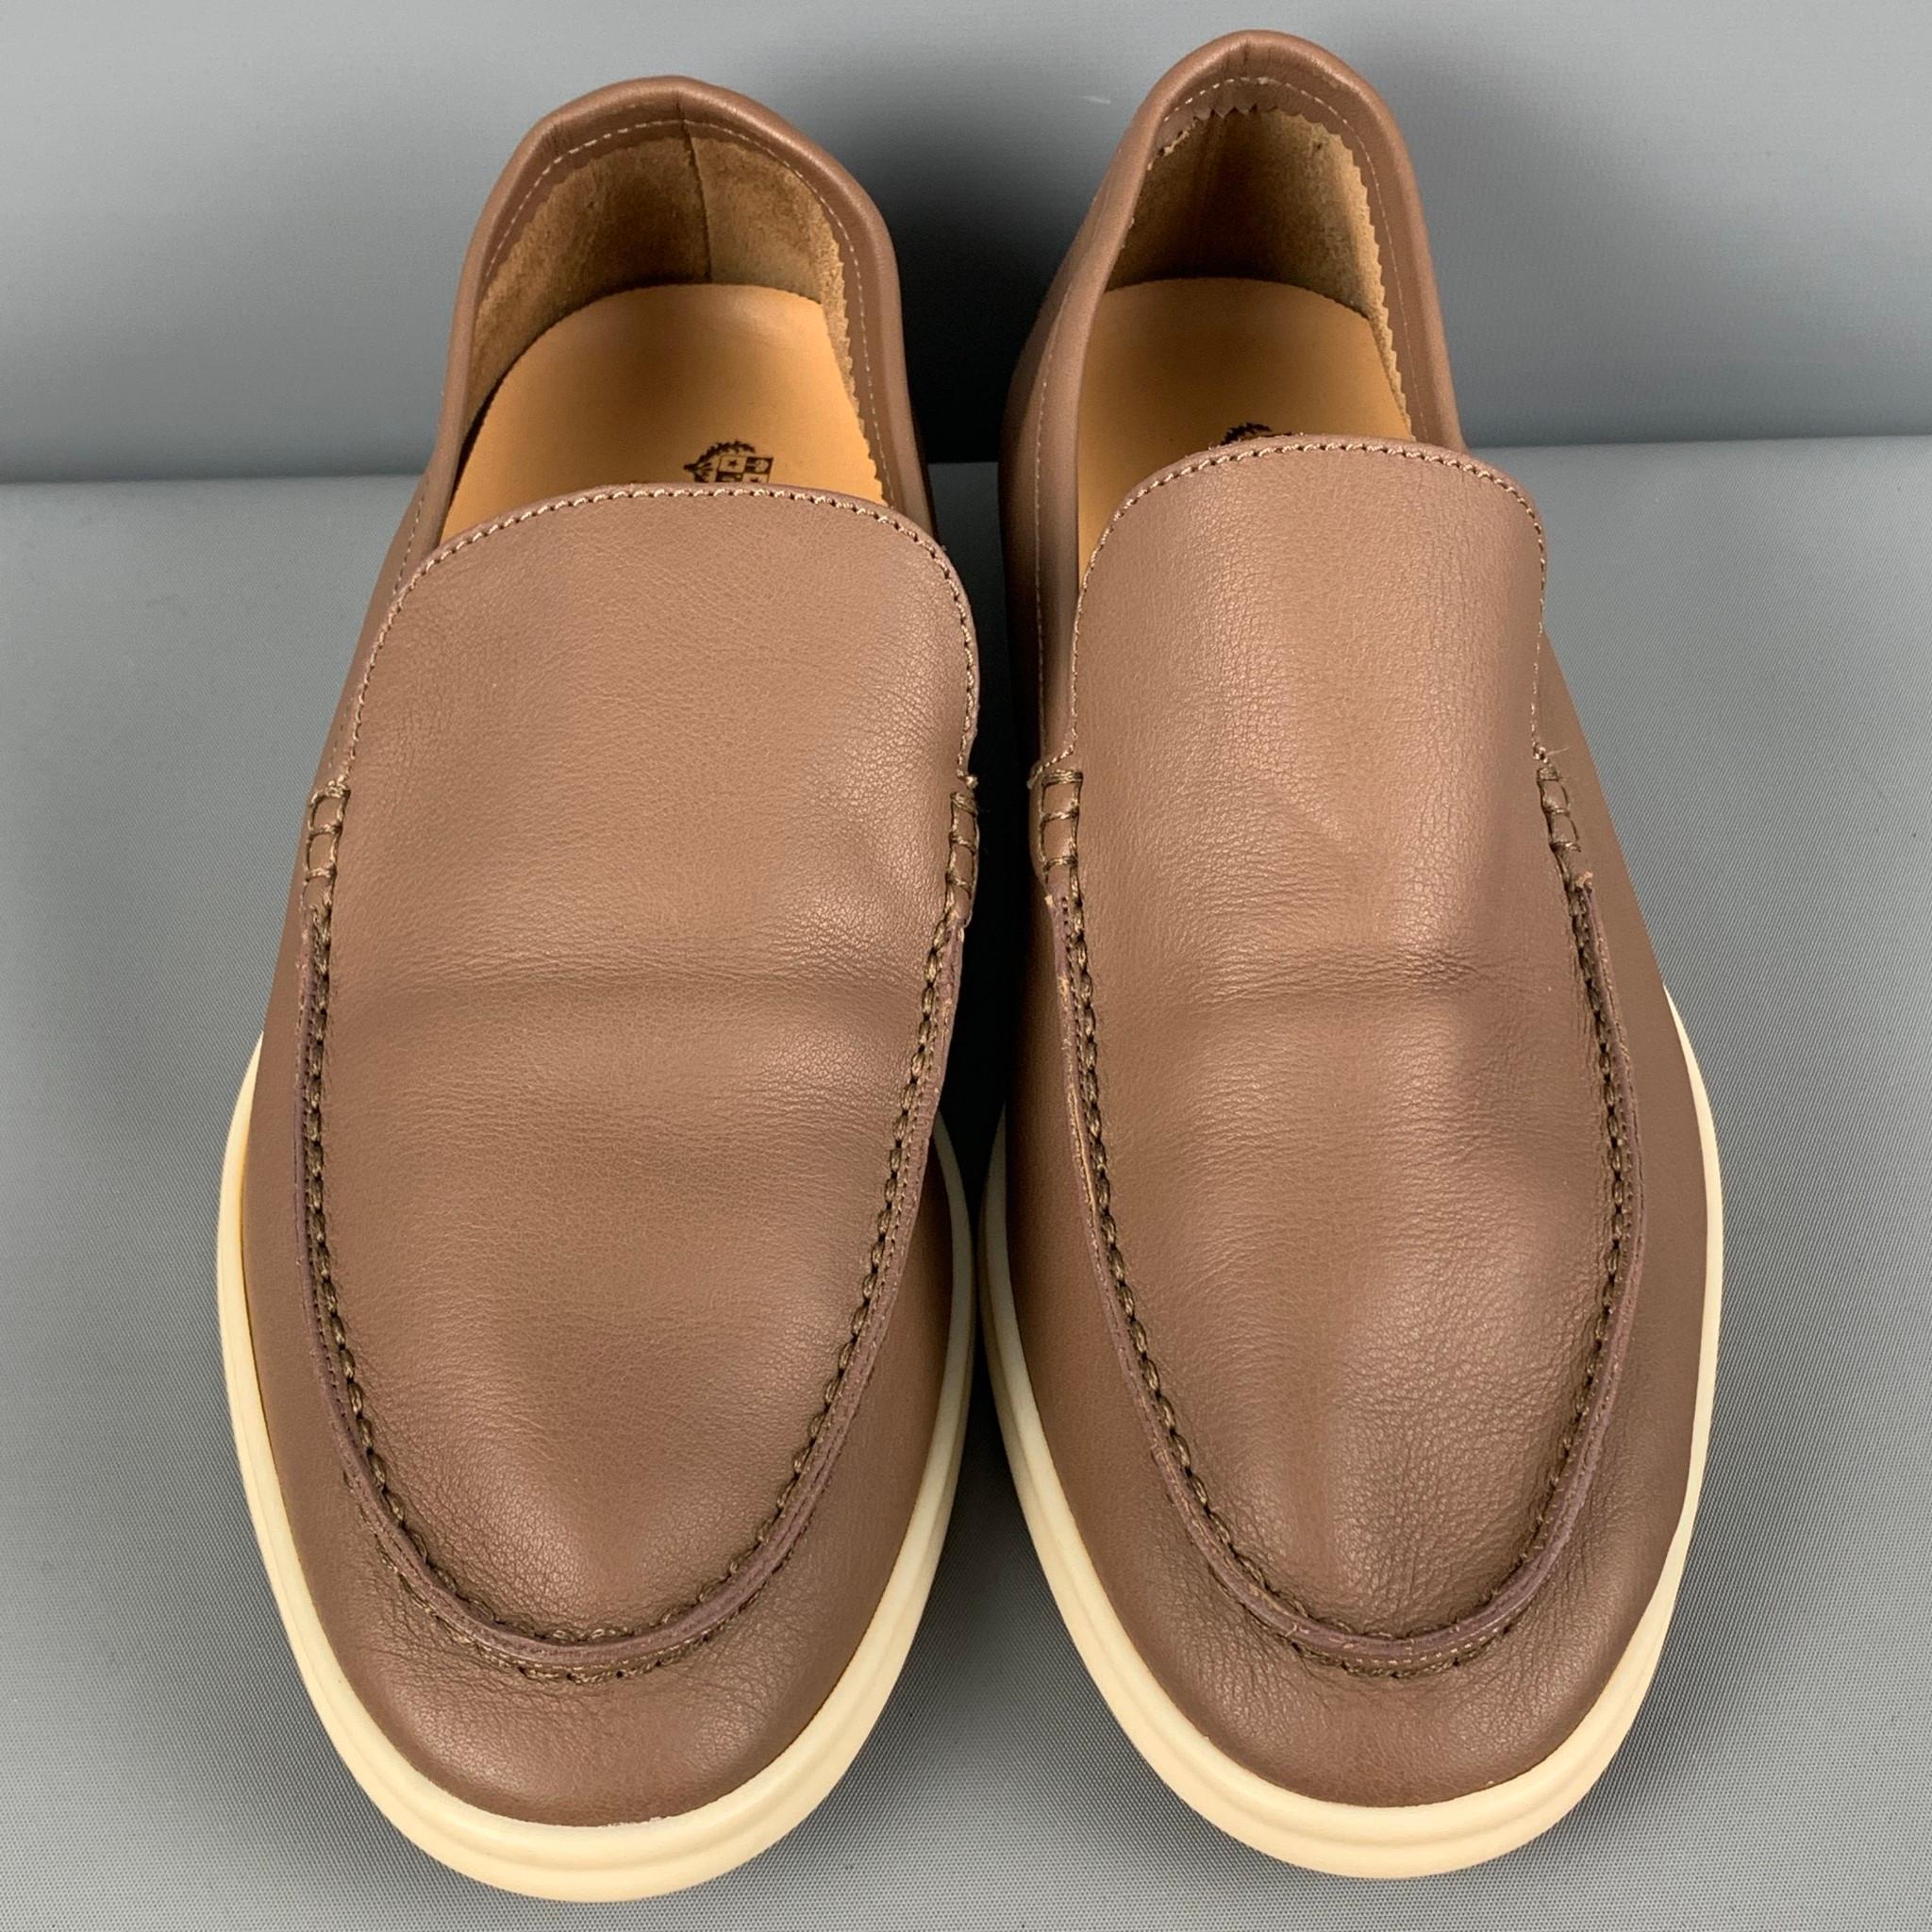 Men's LORO PIANA Size 8 Brown Leather Slip On Summer Walk Loafers